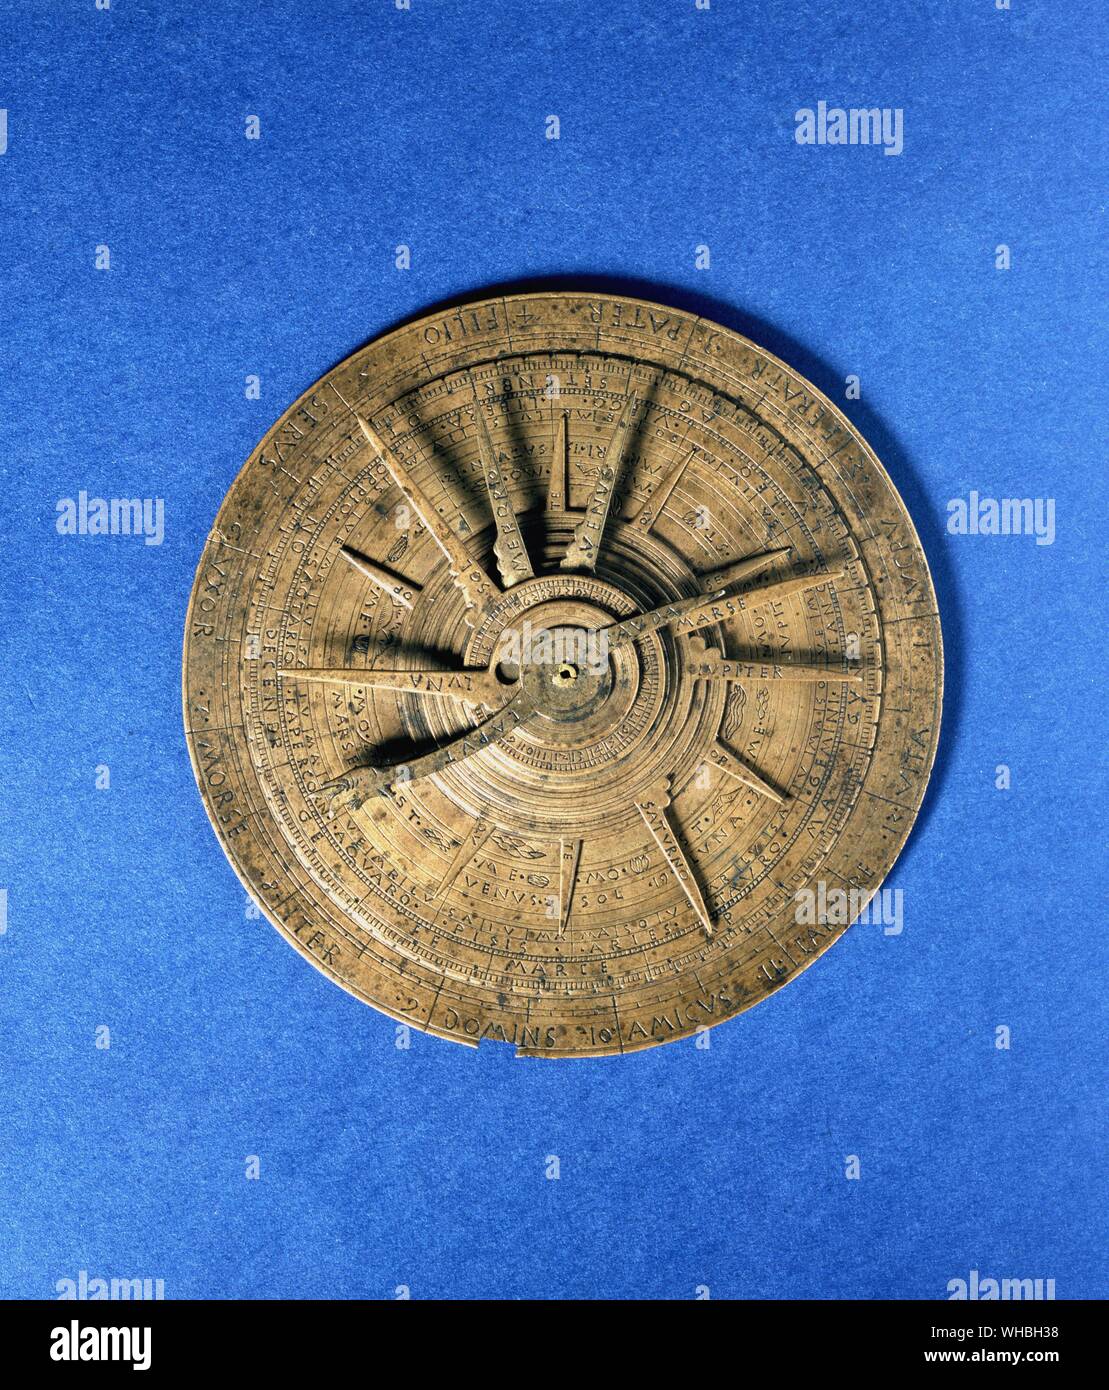 15th century European astrolobe used for calculating horoscopes each arm representing a planet that can be adjusted to position in zodiac at time for which horoscope is drawn up.. Stock Photo